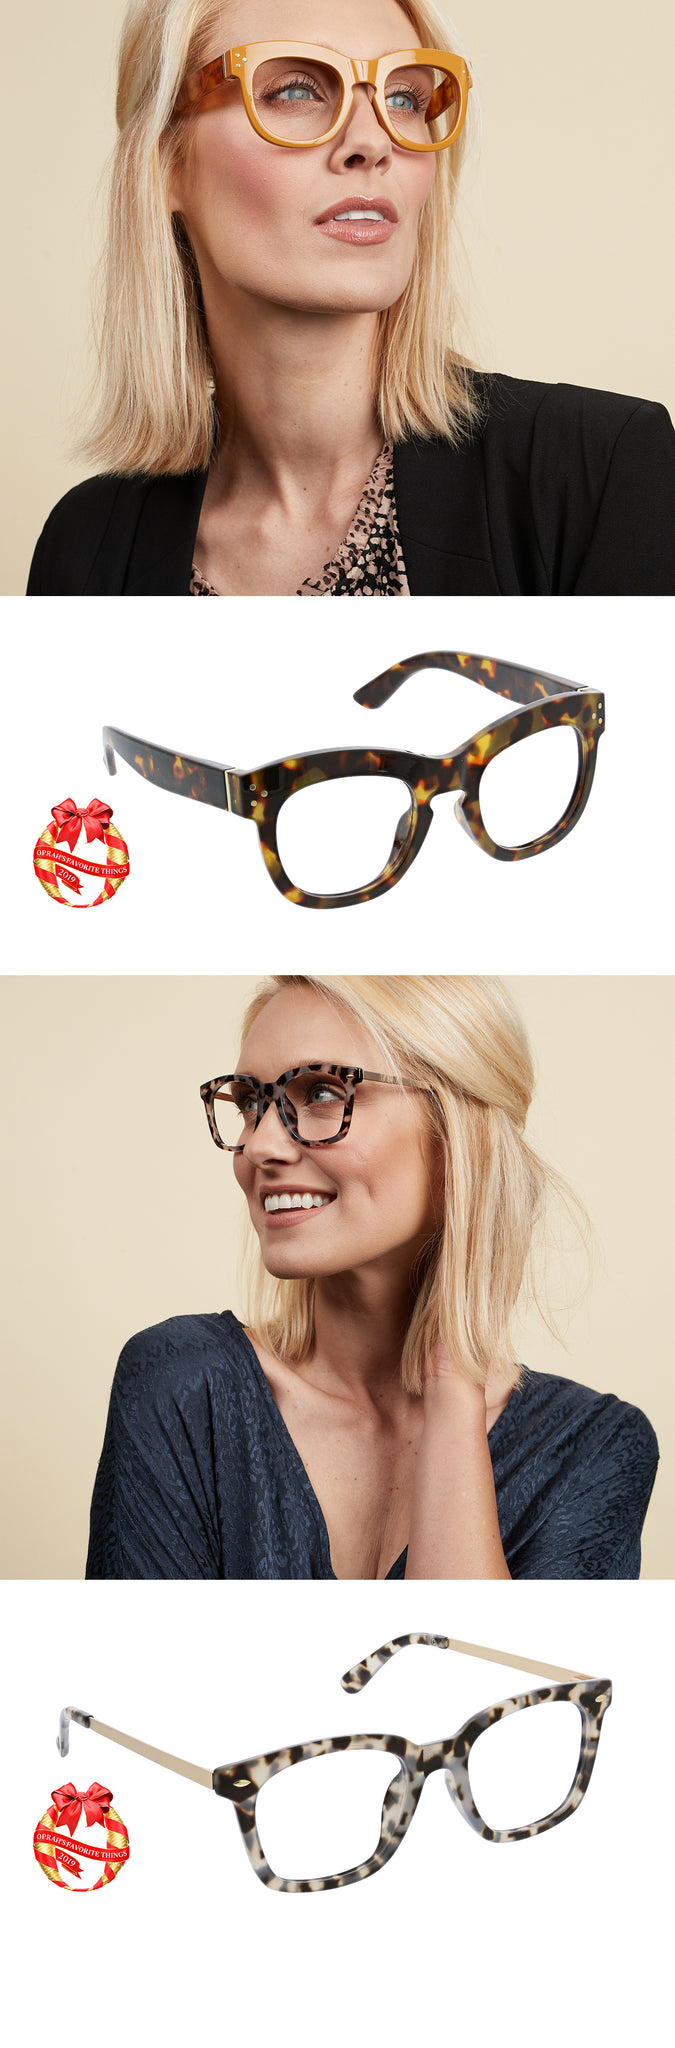 Bravado and Limelight blue light reading glasses by Peepers